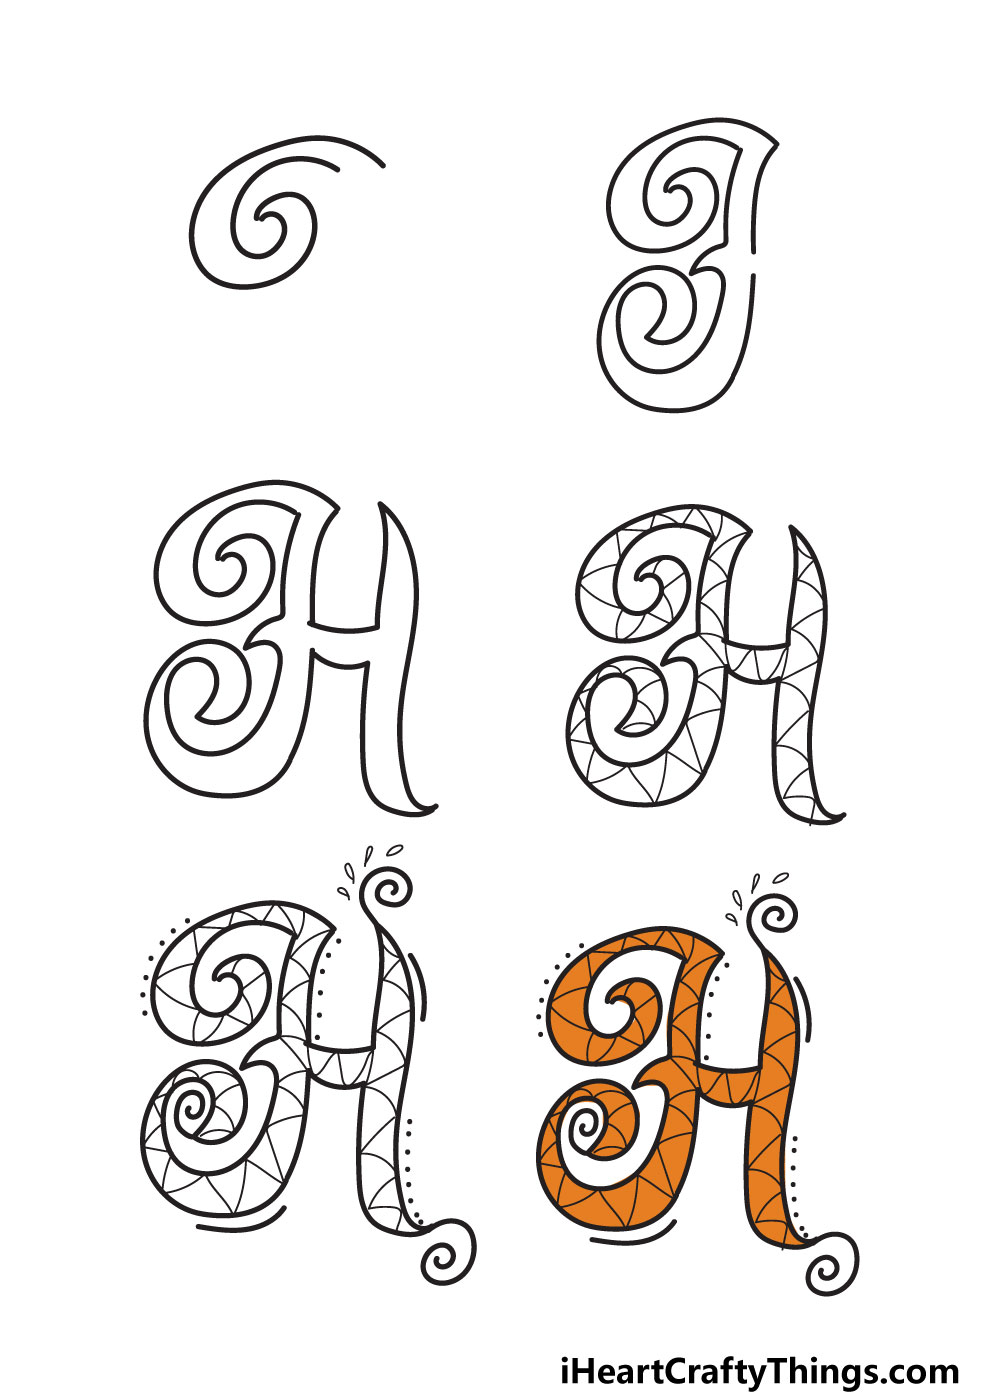 How To Draw Your Own Fancy H